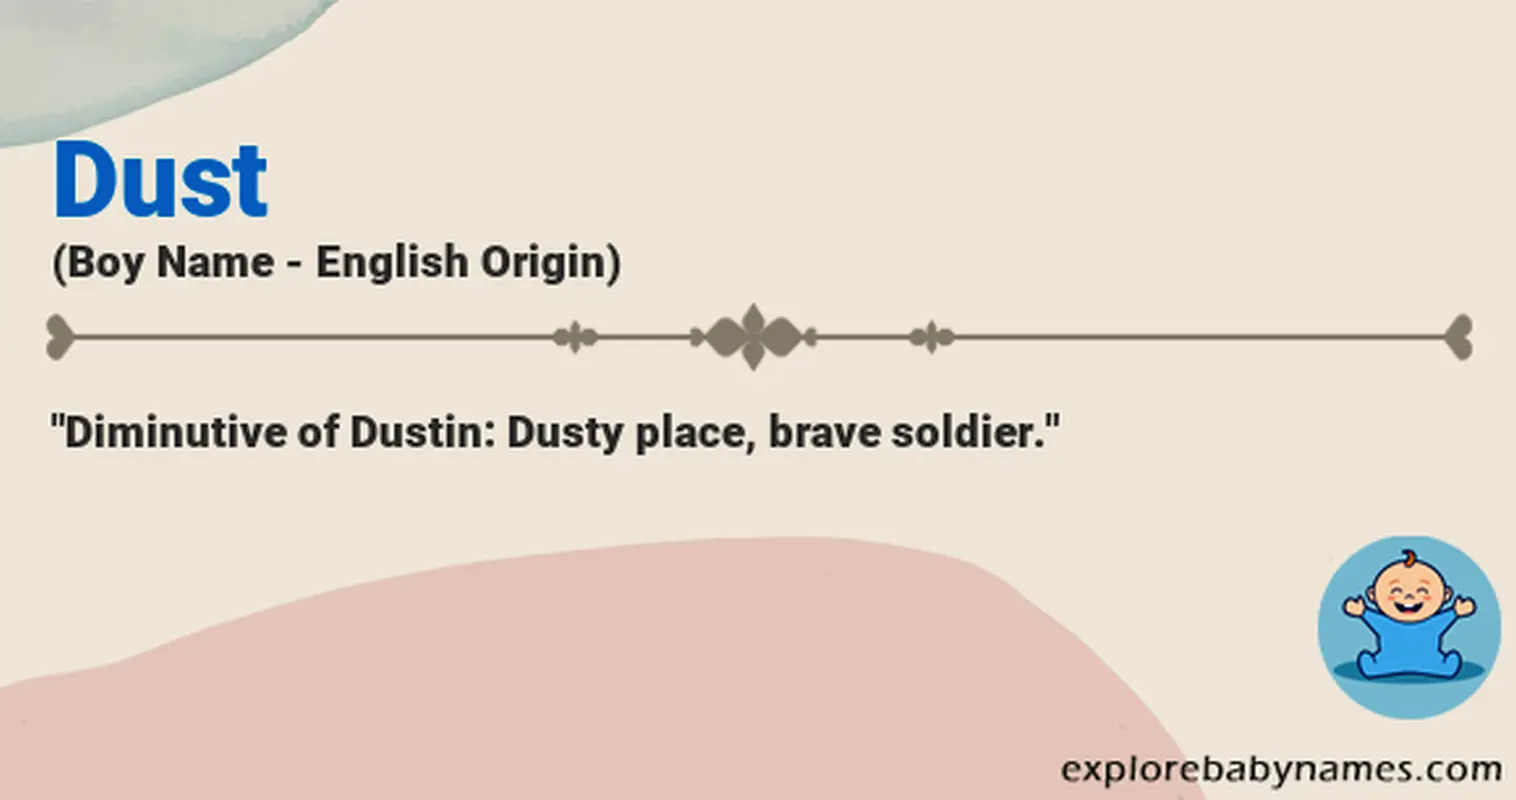 Meaning of Dust